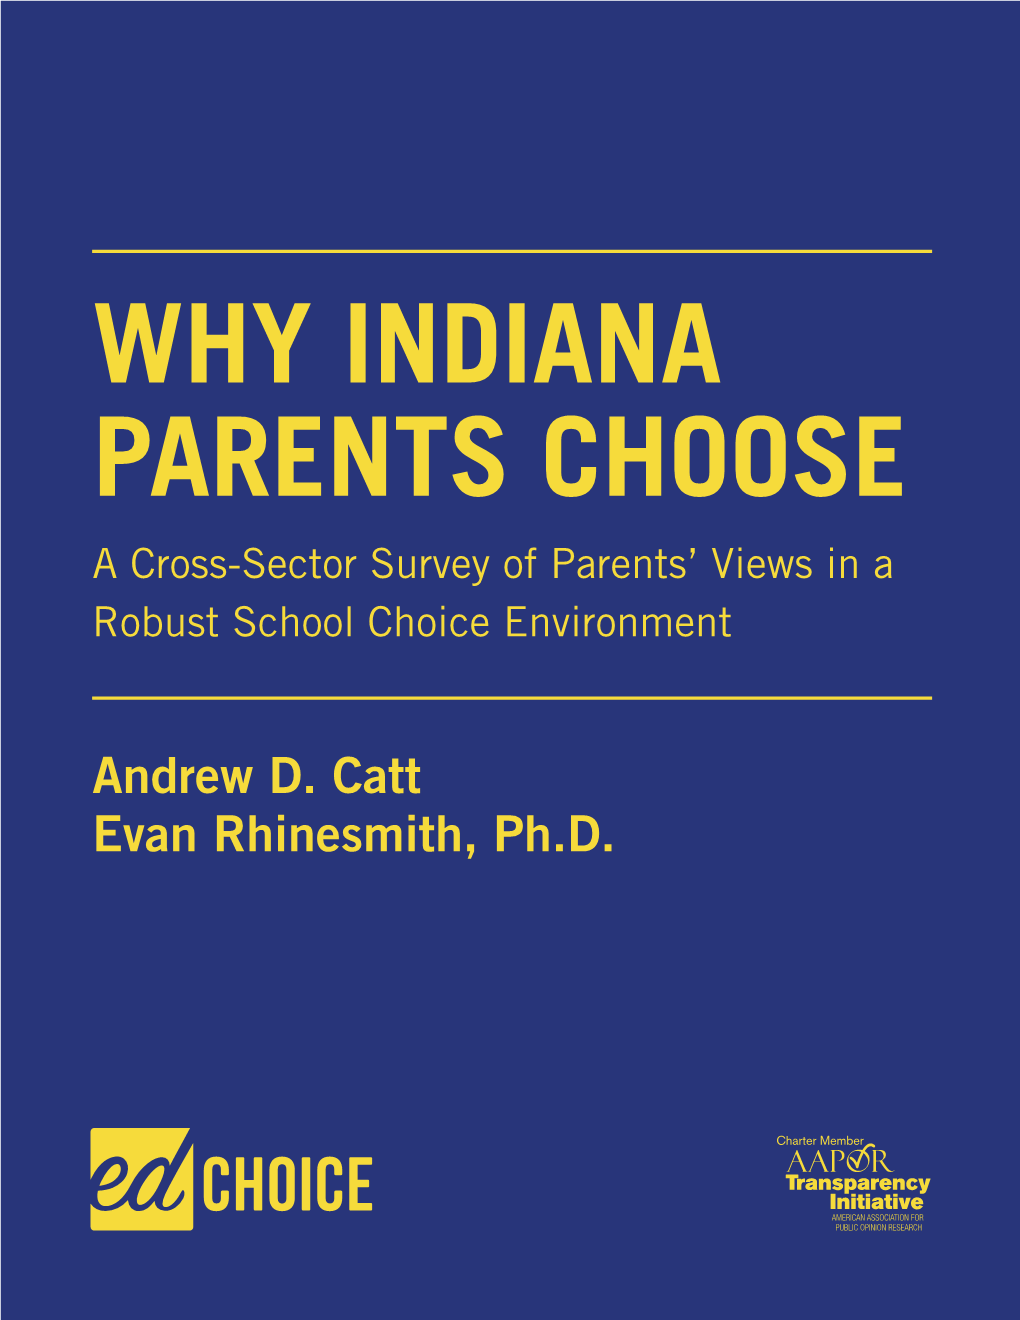 WHY INDIANA PARENTS CHOOSE a Cross-Sector Survey of Parents’ Views in a Robust School Choice Environment